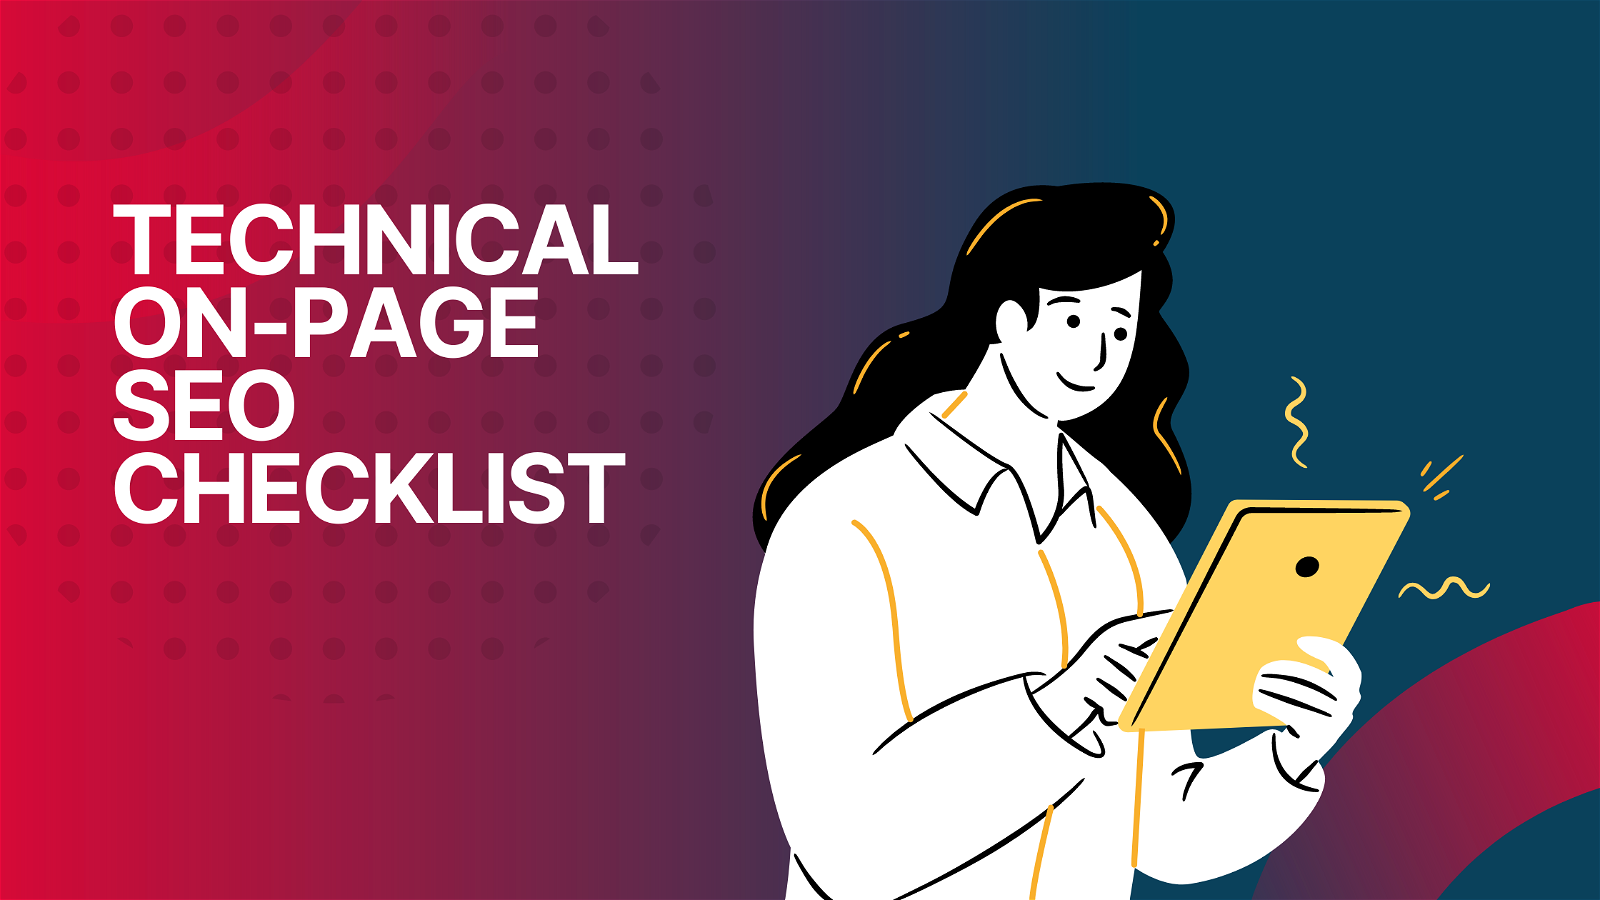 This image is a checklist of technical on-page SEO tasks that need to be completed.